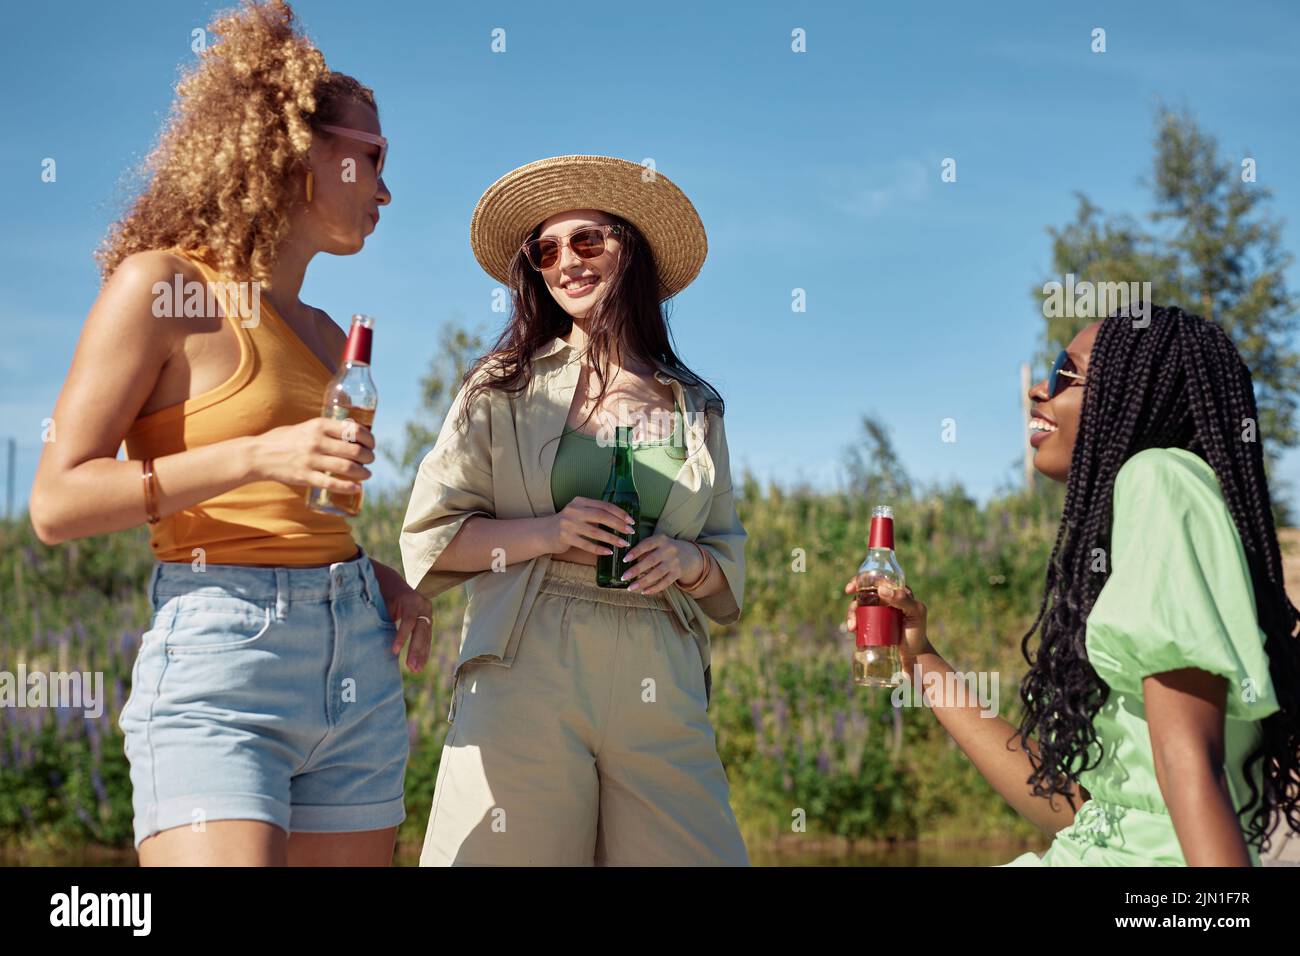 Diverse group of three young women enjoying refreshing drinks outdoors in Summer lit by sunlight Stock Photo